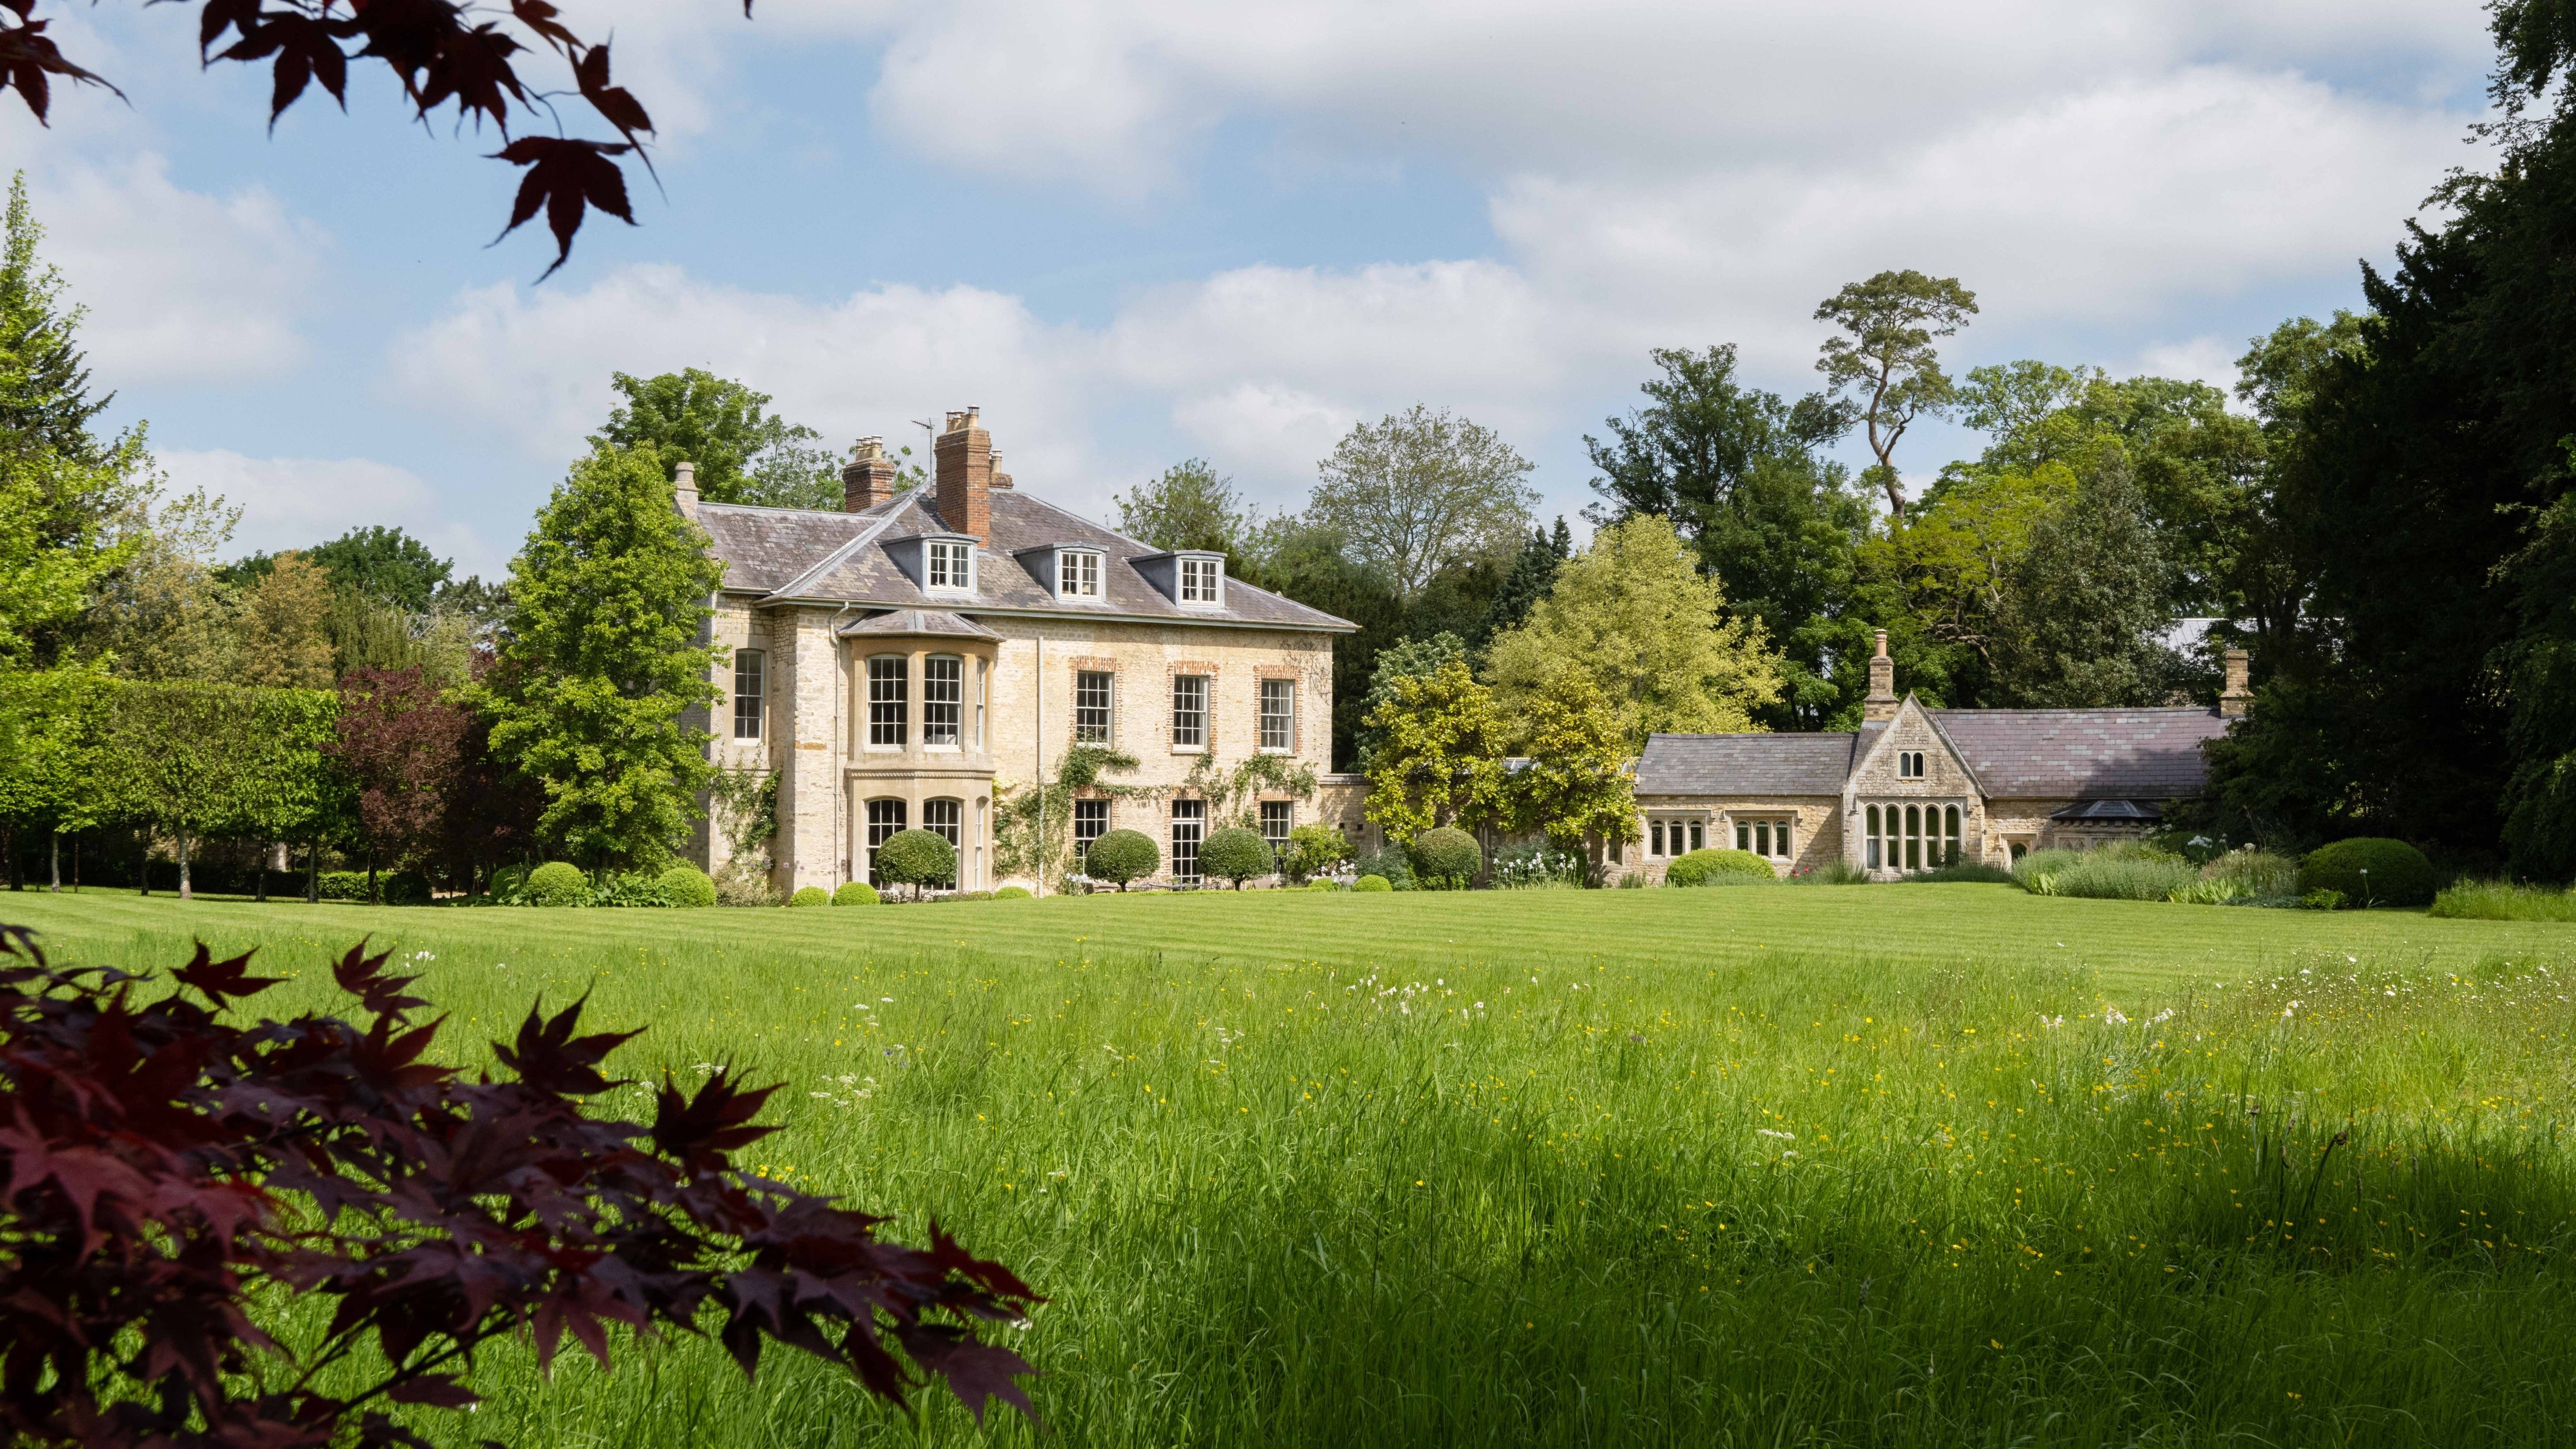 The Old Rectory in Oxfordshire is on sale for £4.5 million with The Country House Department